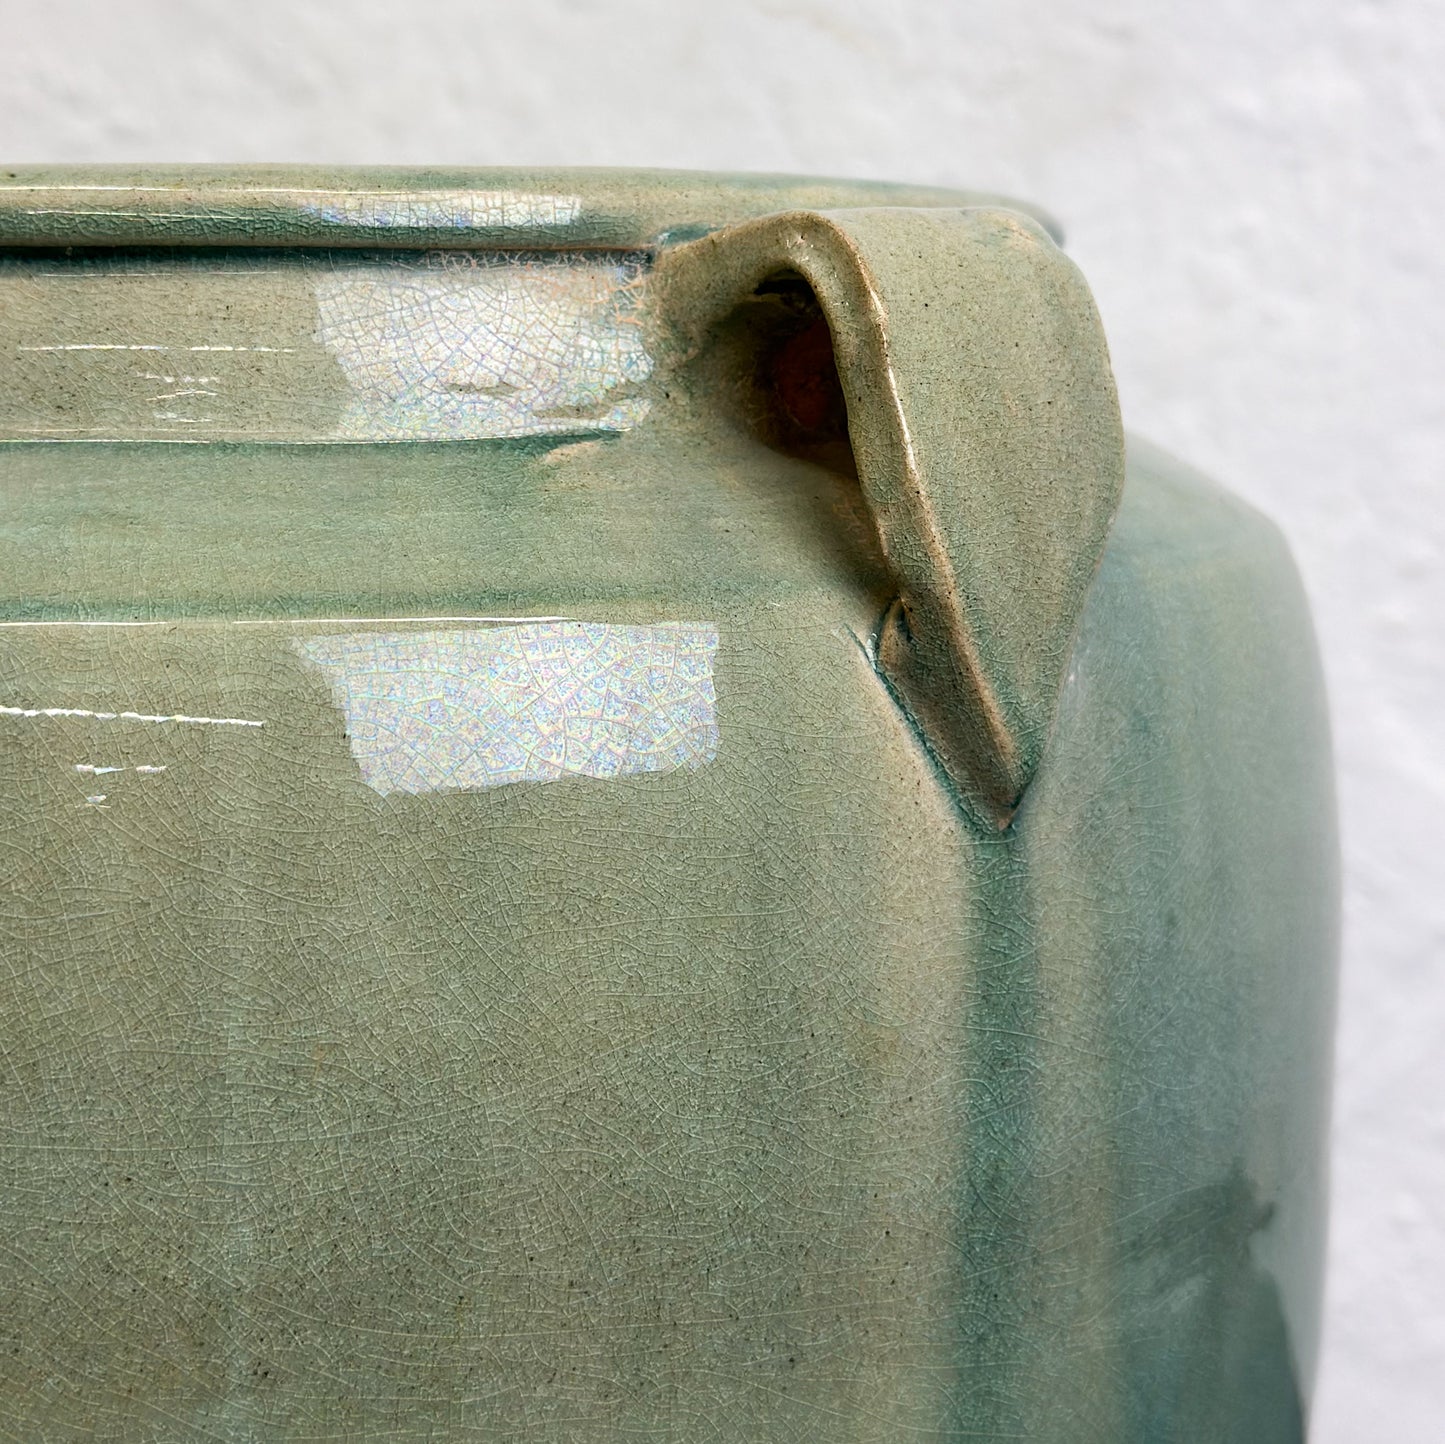 Ceramic Tapered Pot with Handles